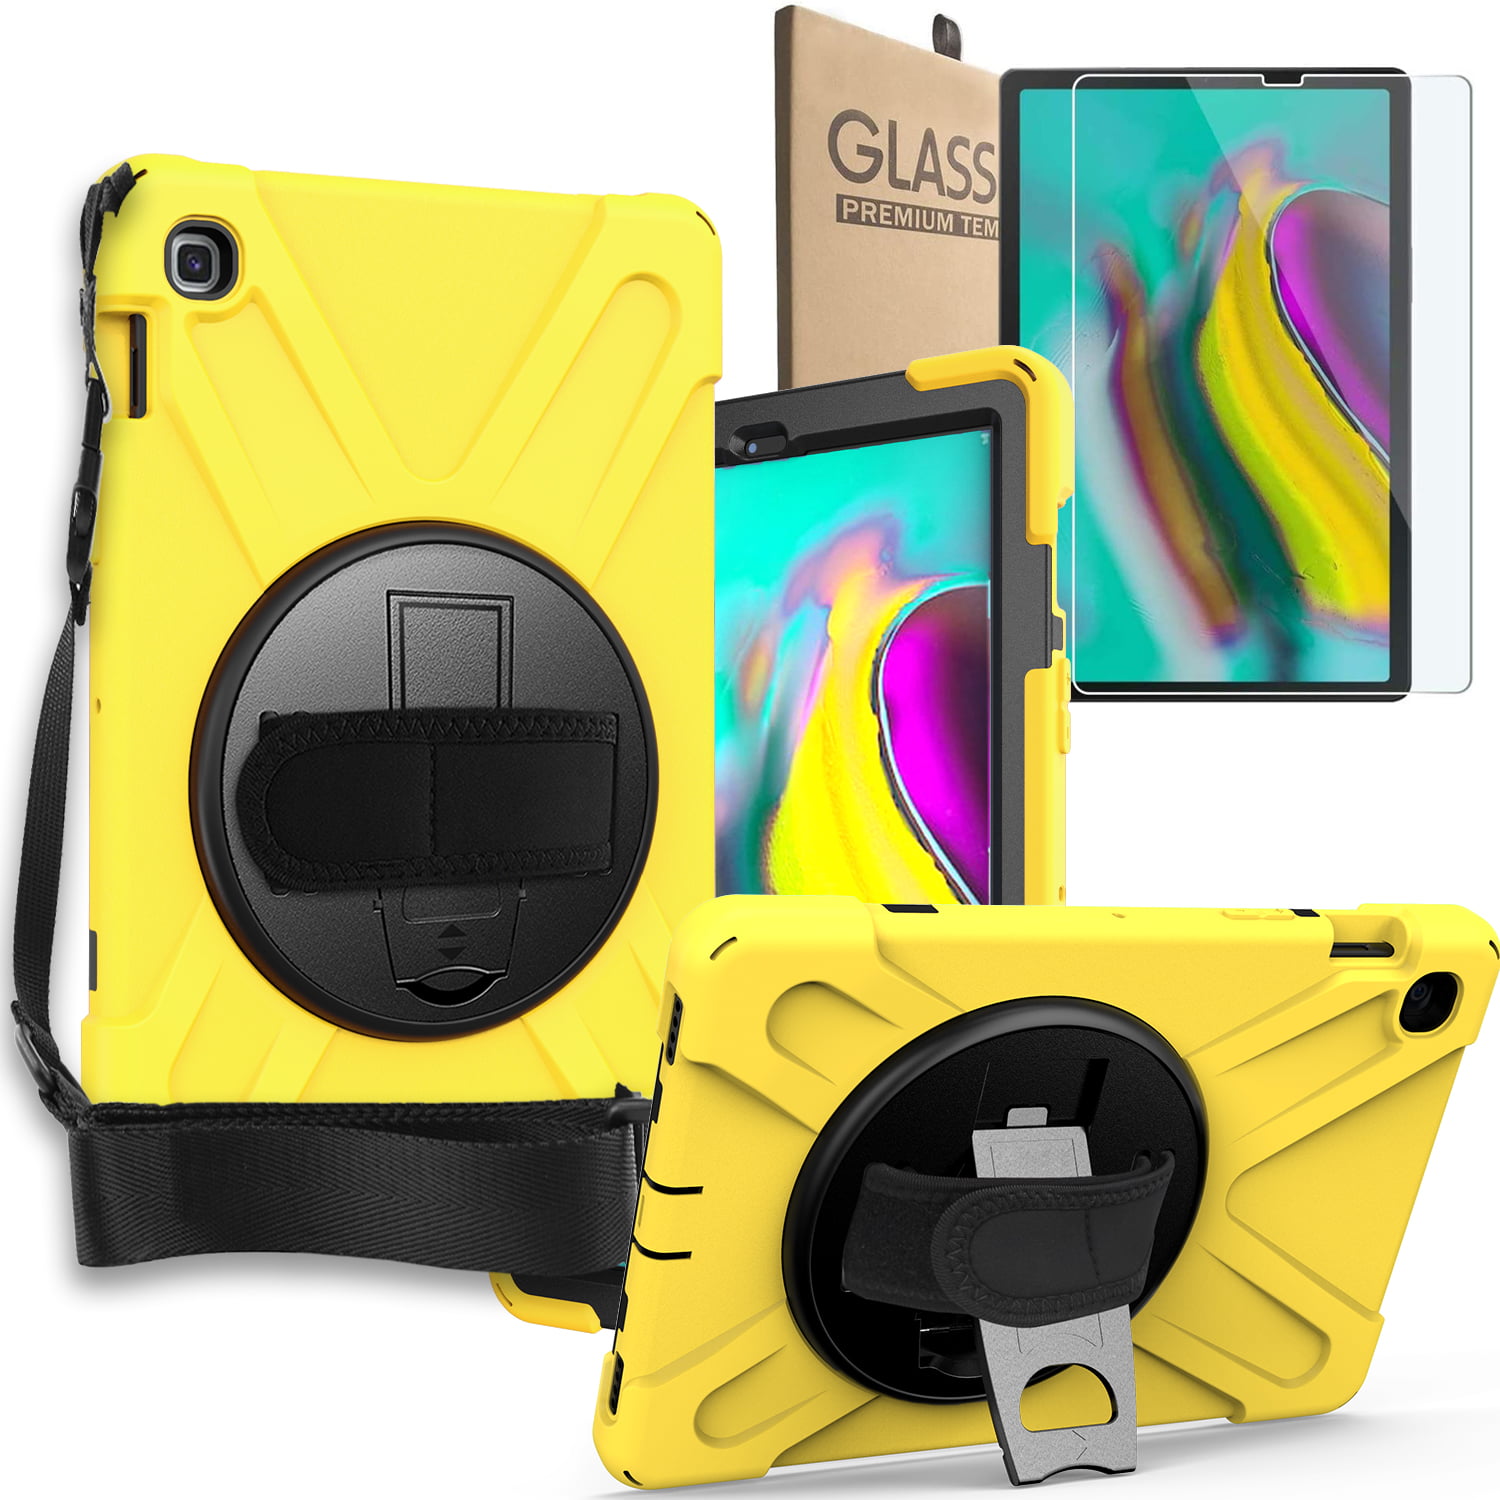 OtterBox Defender Series Case for Samsung Galaxy Tab A 8.0